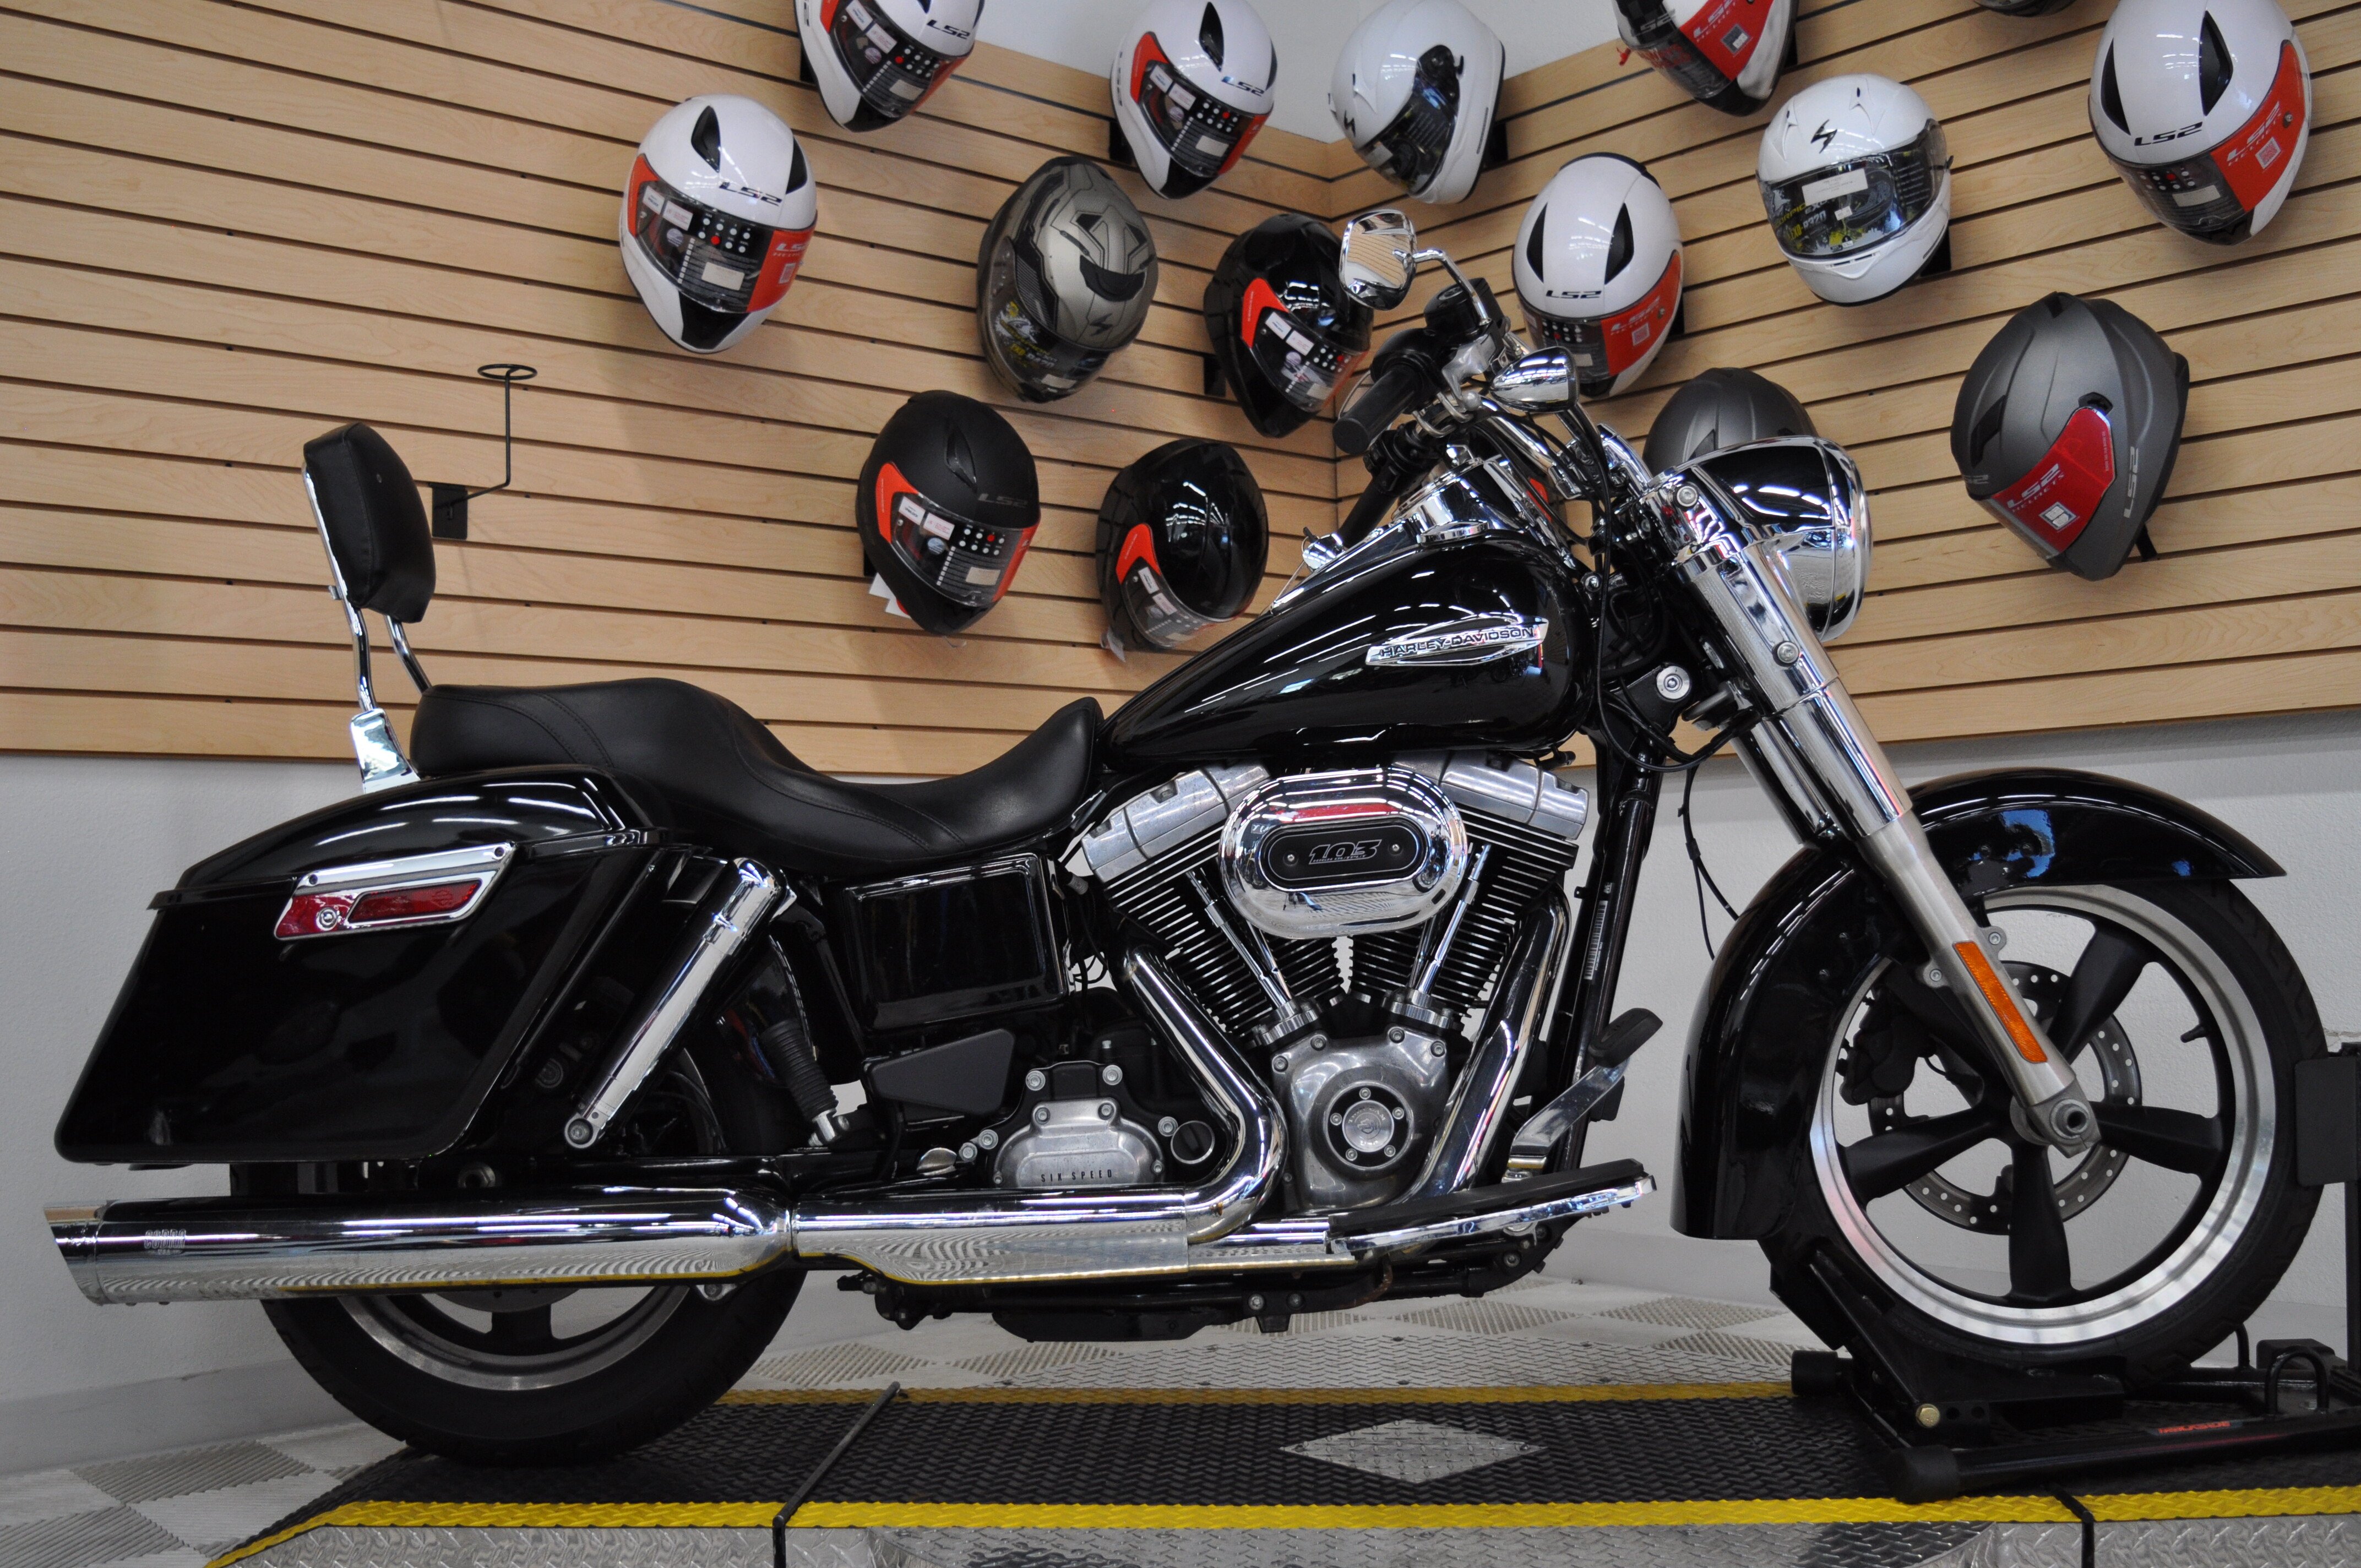 used dyna for sale